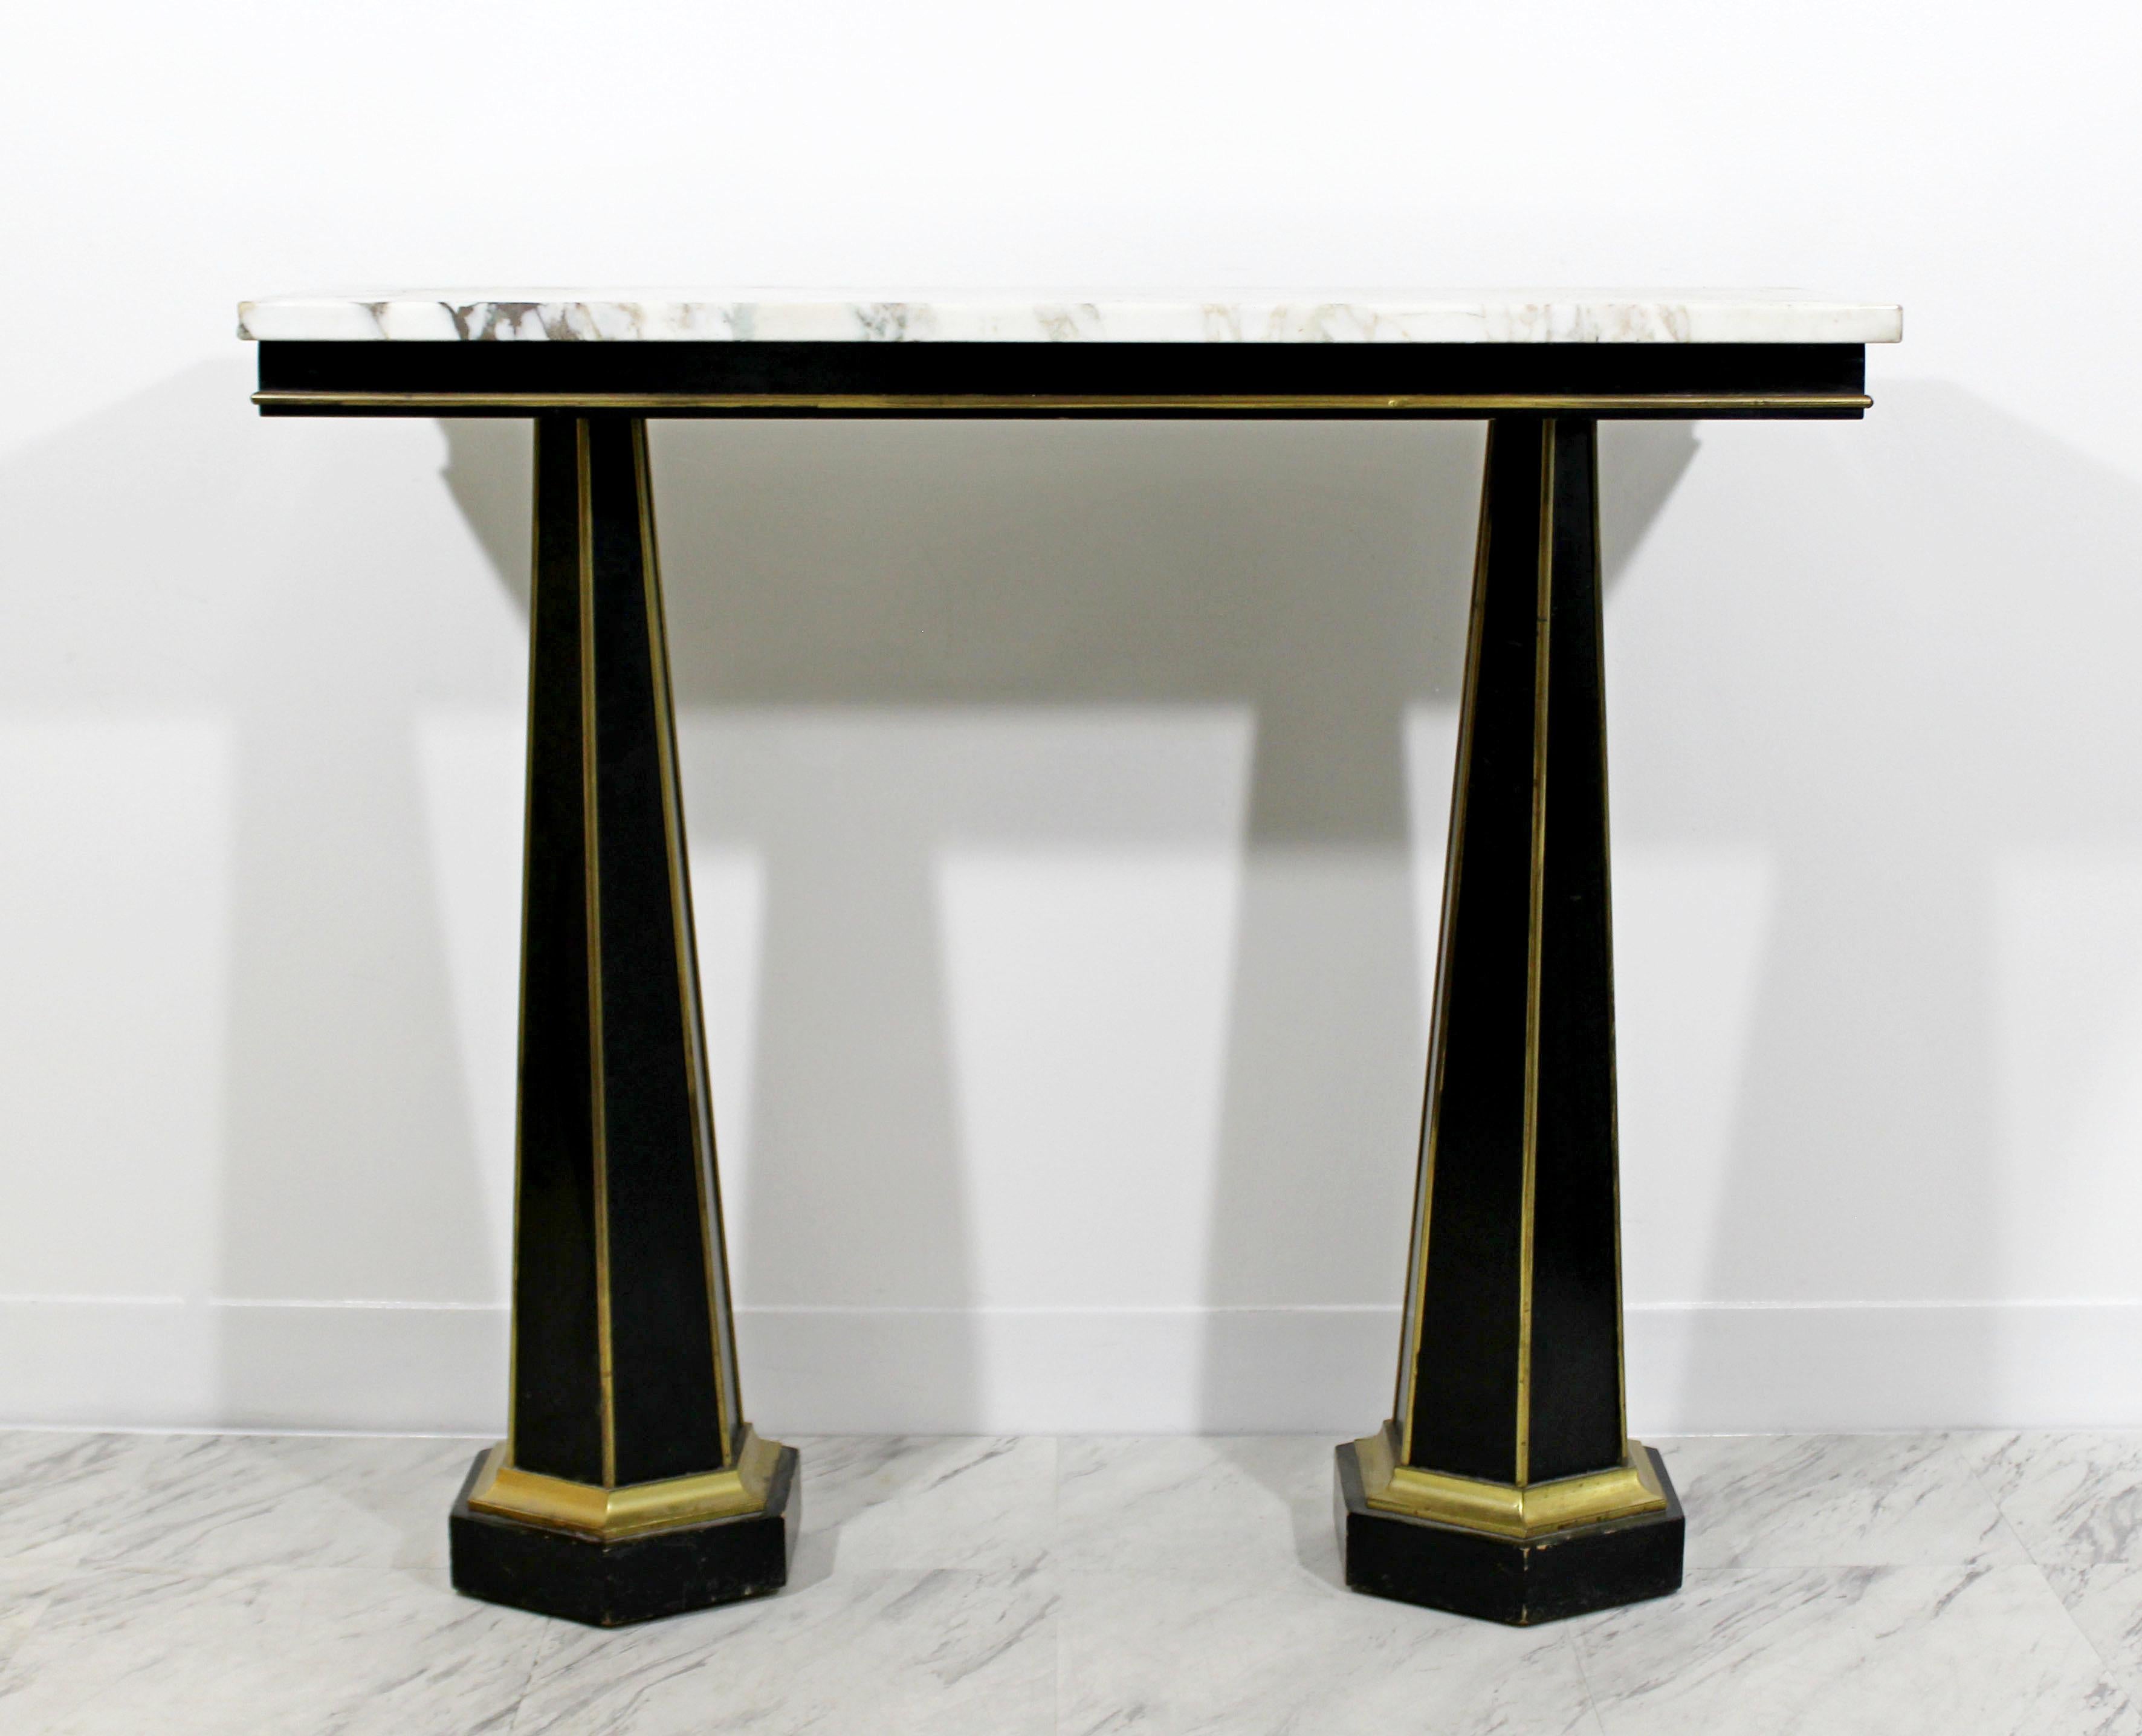 For your consideration is an absolutely stunning Italian Art Deco white marble topped console table, with black and gold ebonized base, circa 1930s. In excellent condition. The dimensions are 36